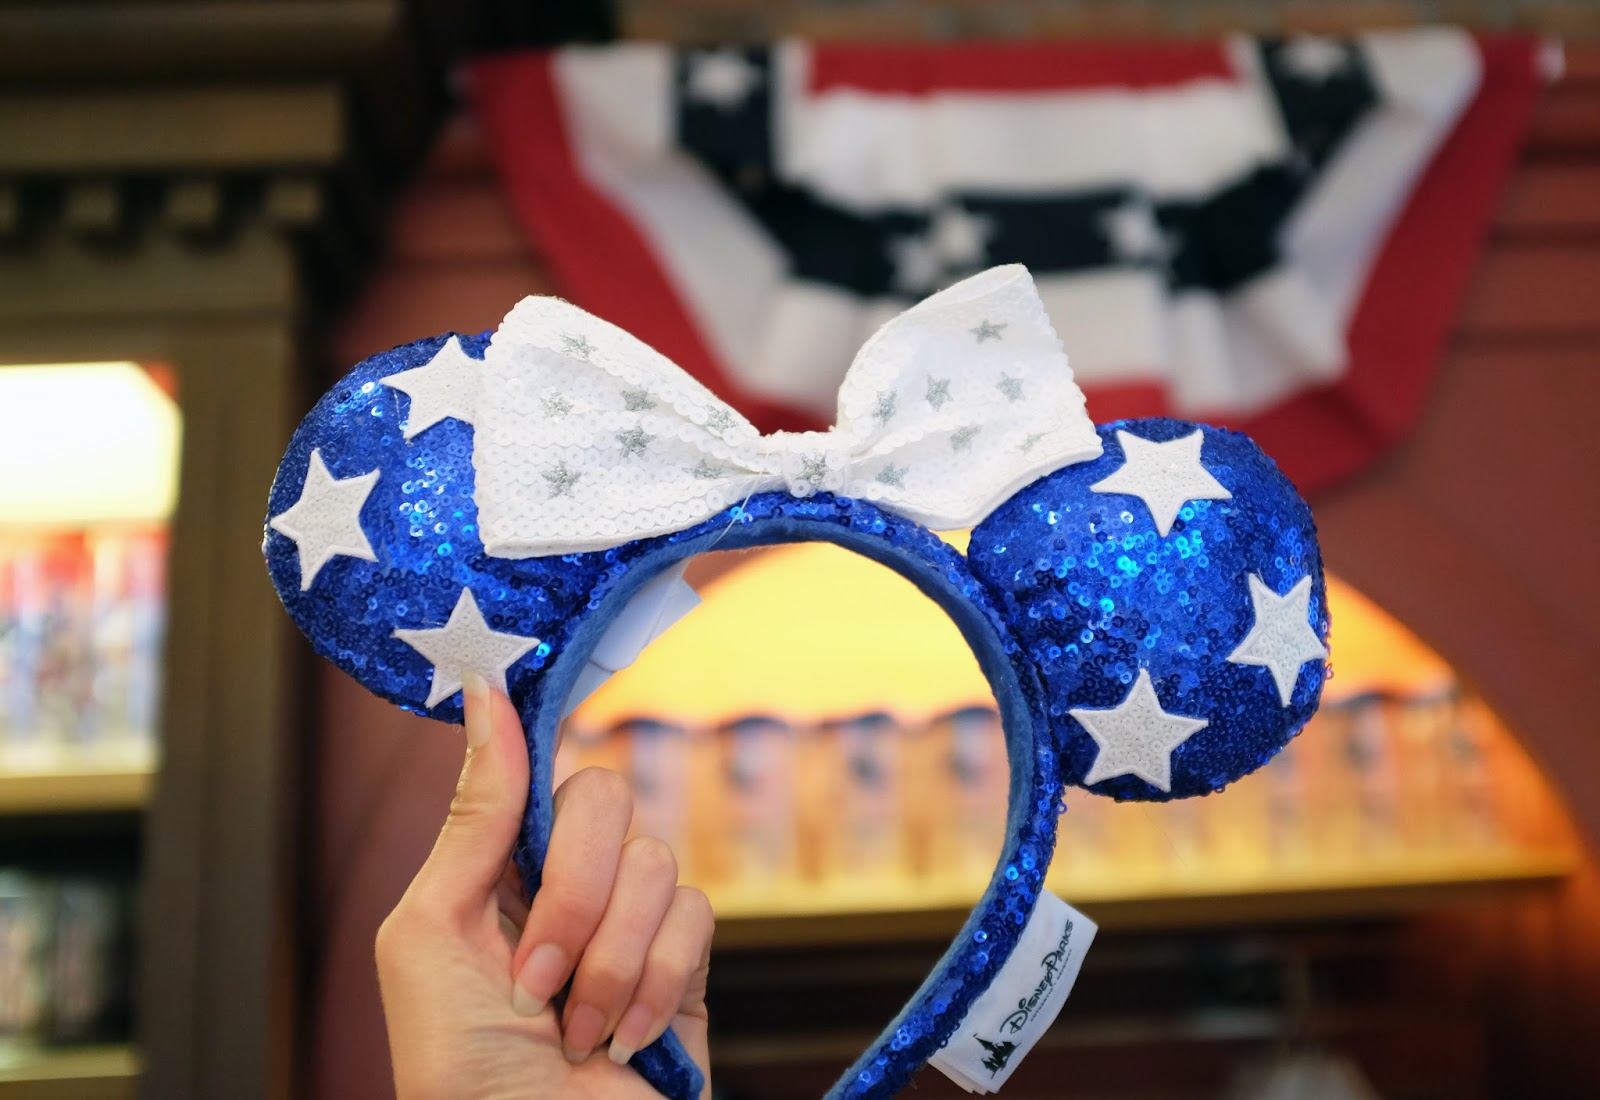 Independence Day Minnie Mouse ears at Epcot